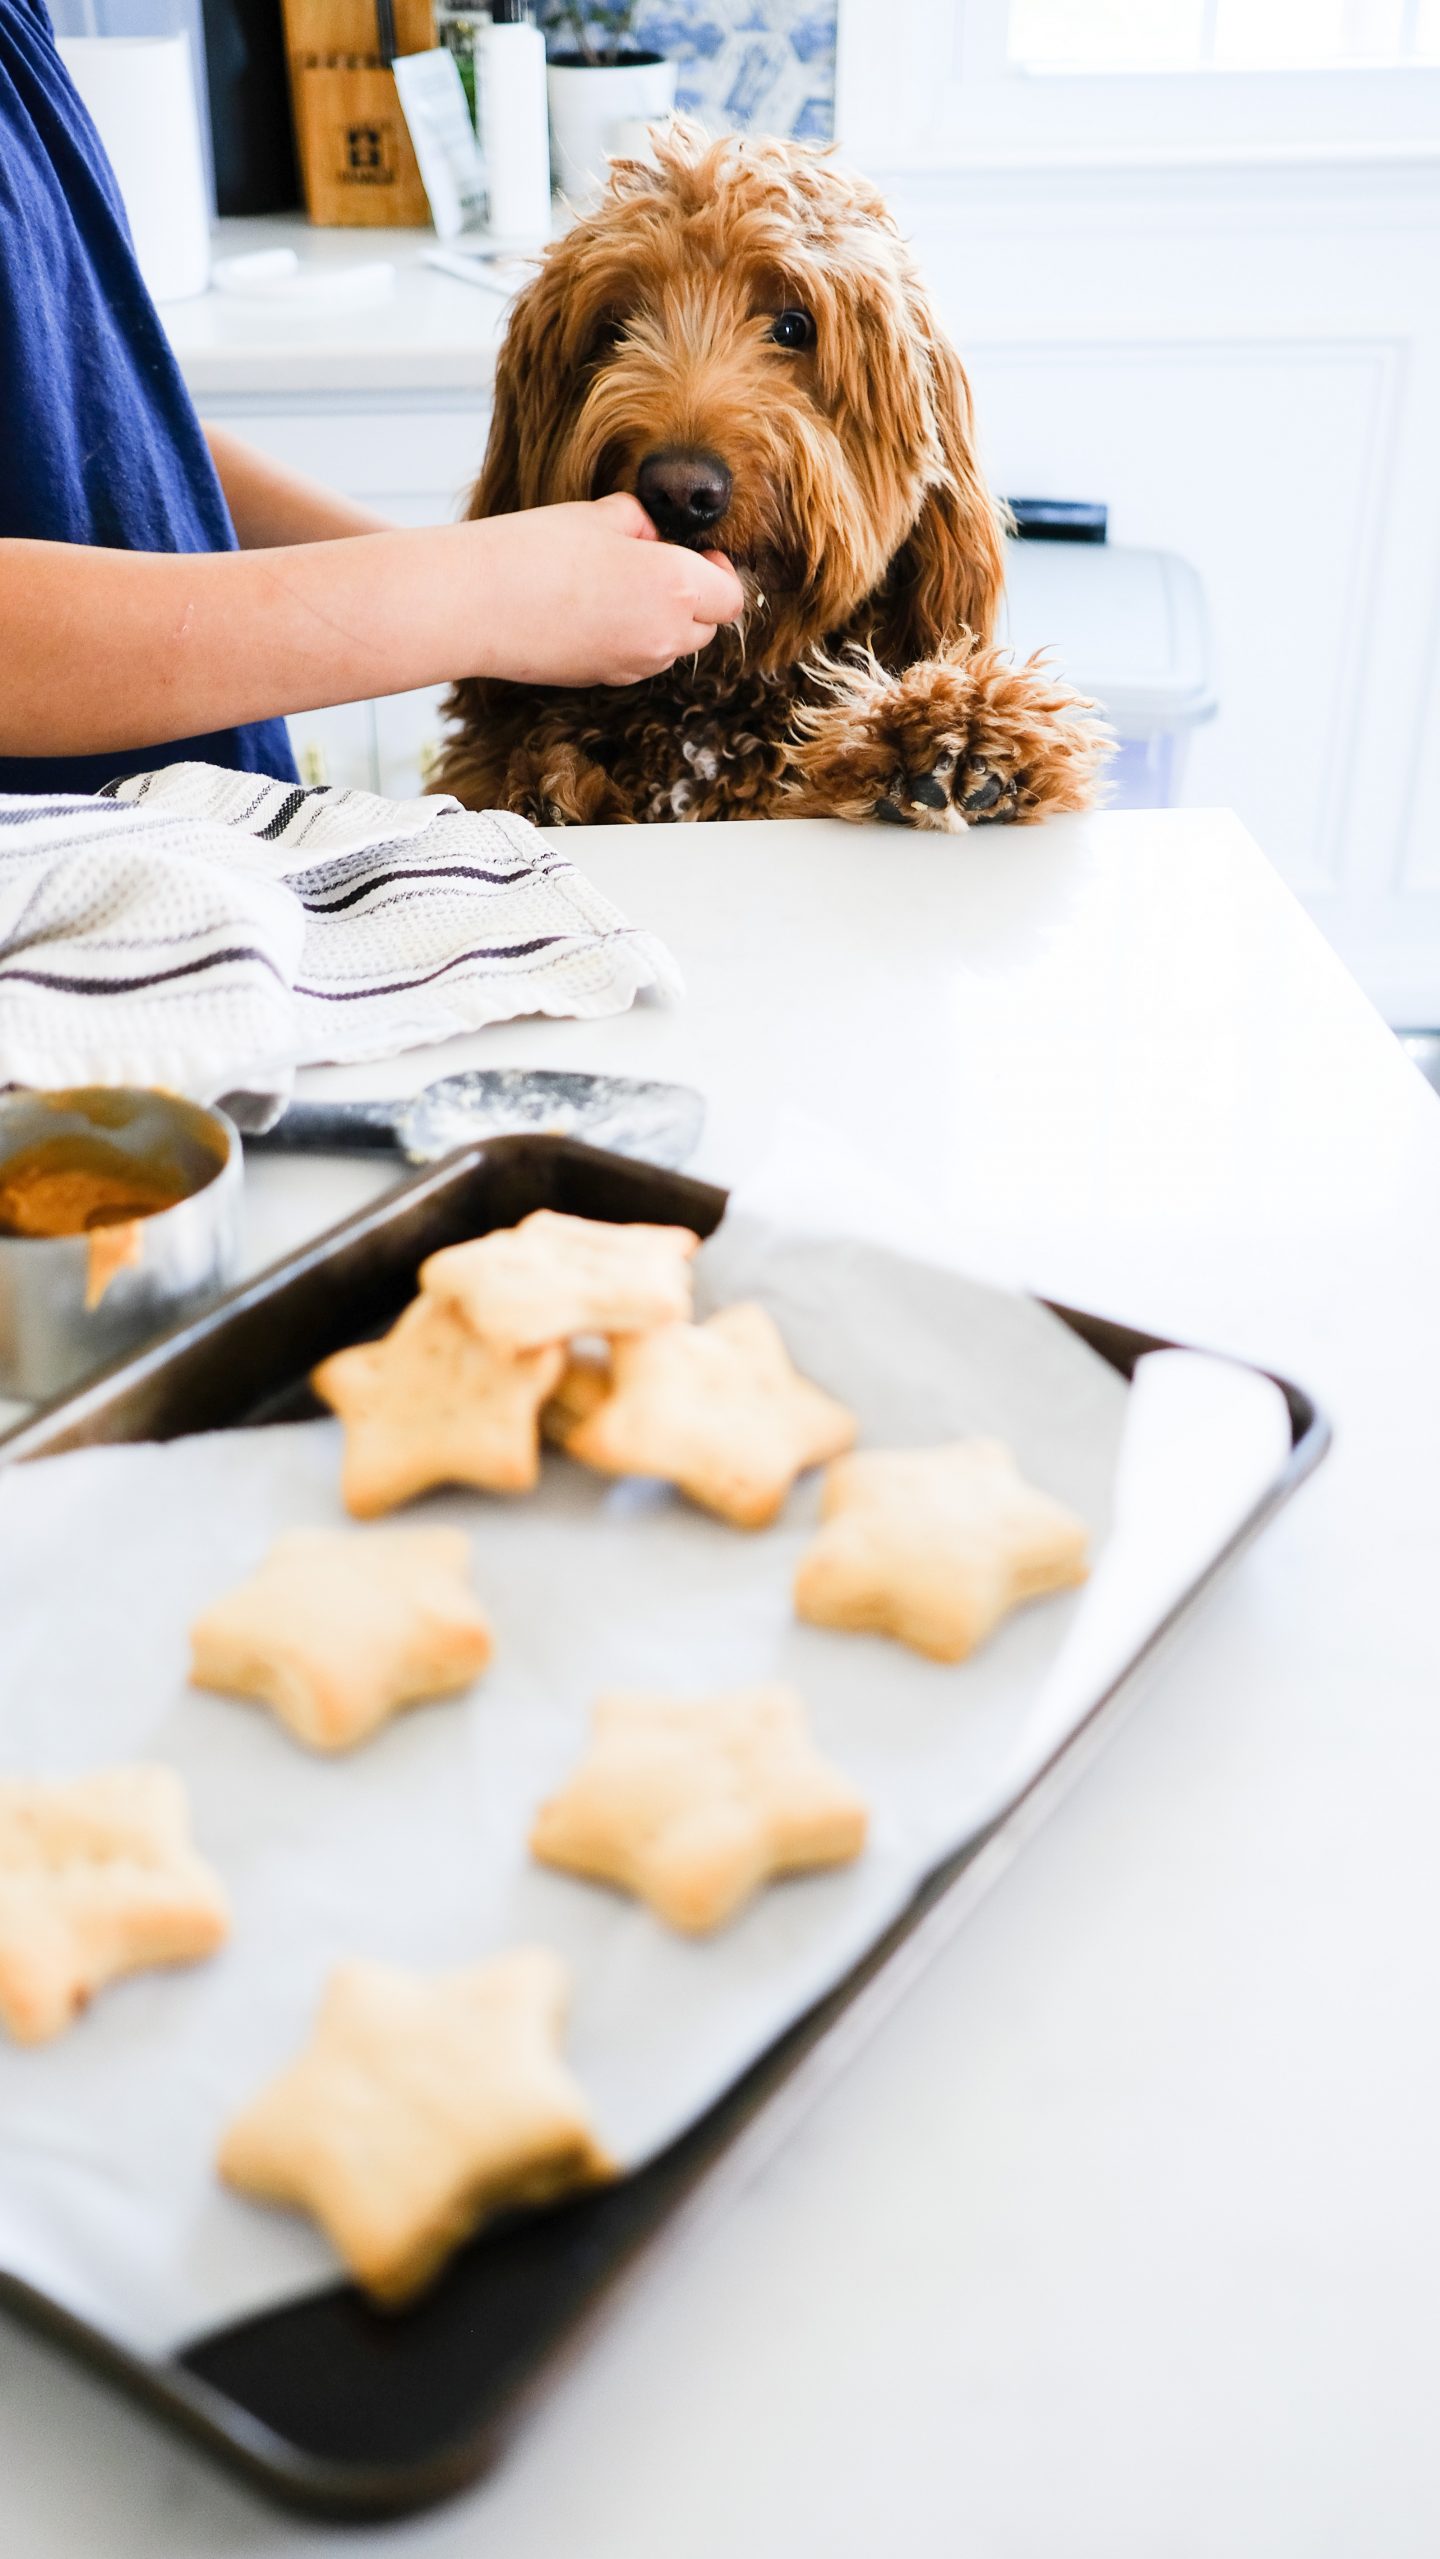 Chocolate and Lace shares her recipe for star shaped peanut butter dog stars